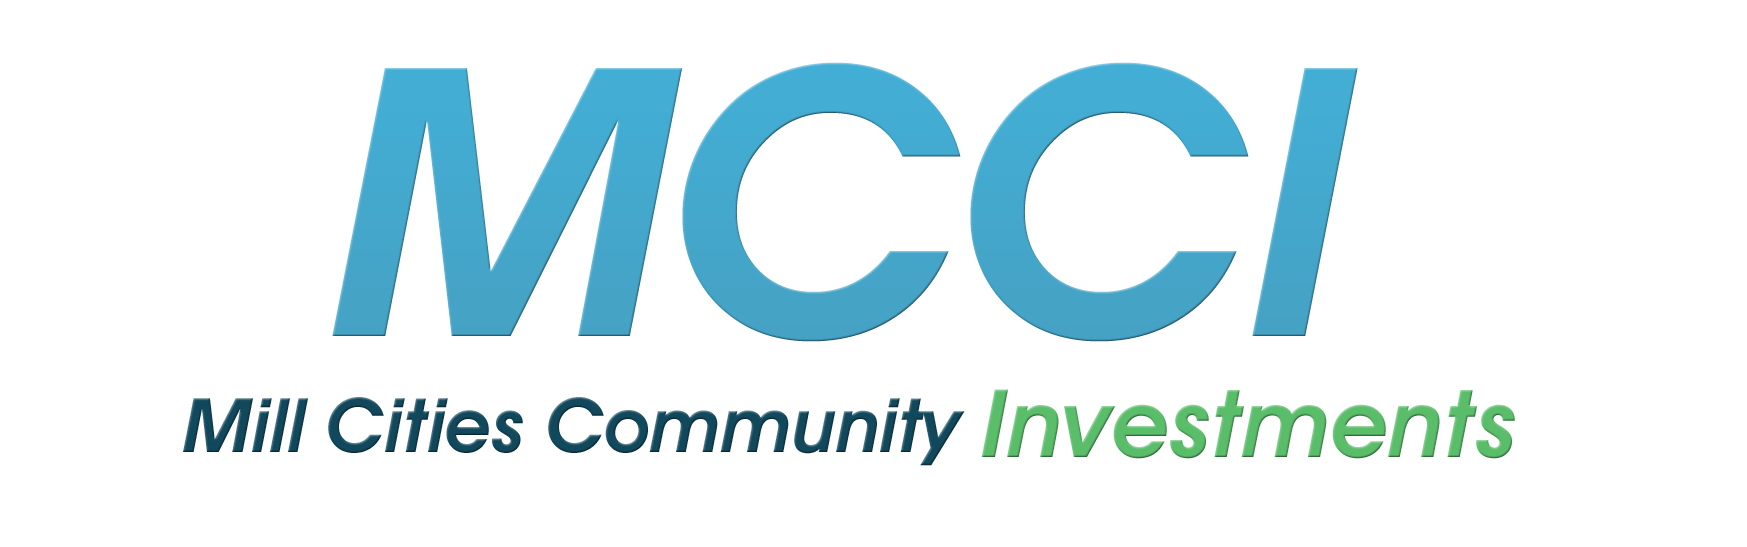 Mcci Logo - Home - Mill Cities Community Investments